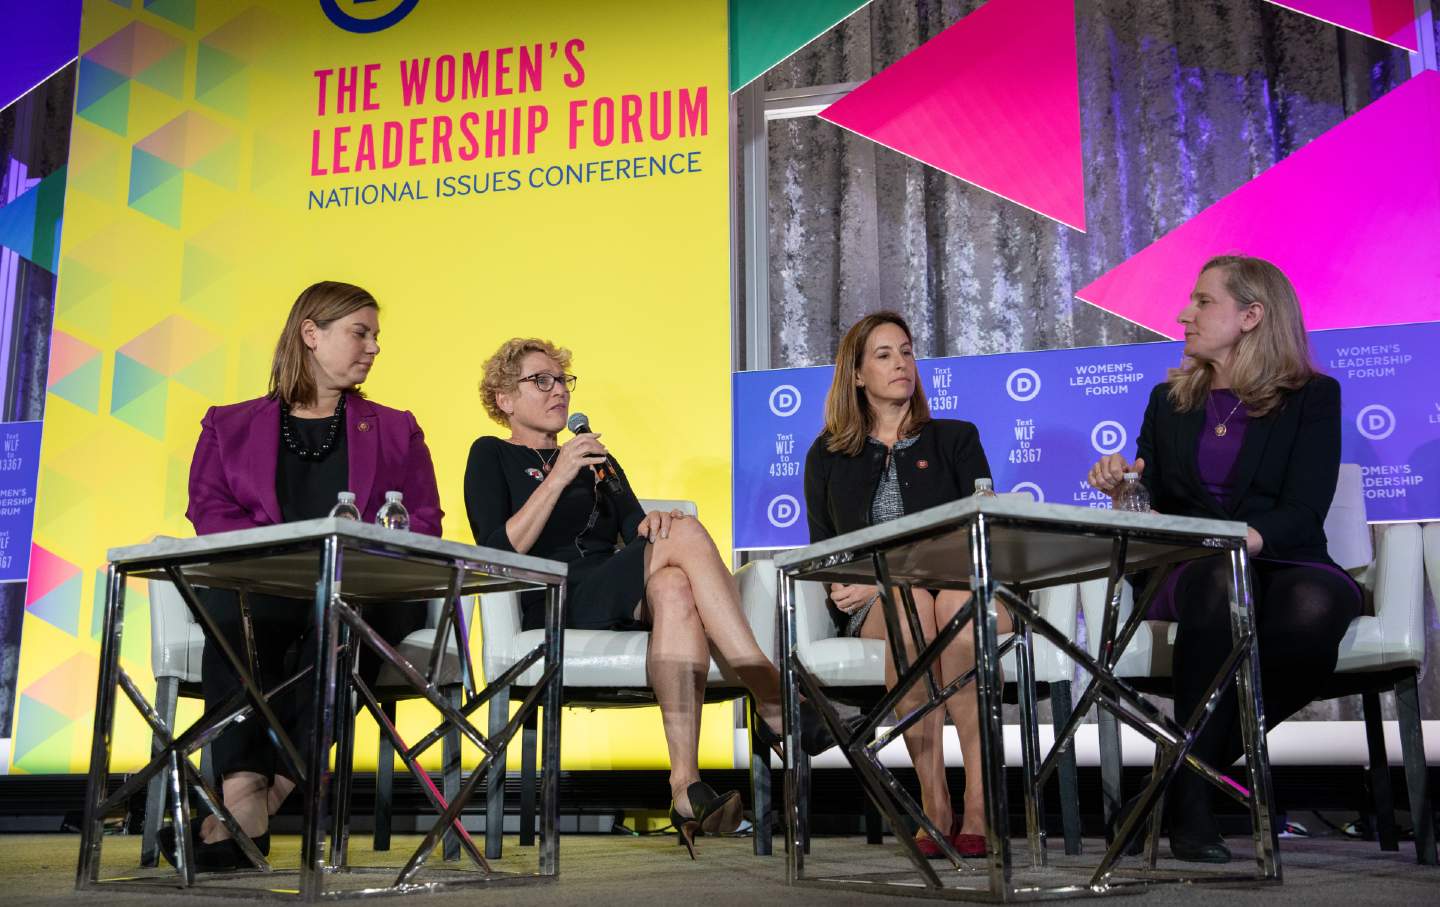 From left, Representatives Elissa Slotkin, Chrissy Houlahan, Mikie Sherrill, and Abigail Spanberger participate in a panel discussion during the DNC Women's Leadership Forum conference in Washington, D.C., on October 17, 2019.